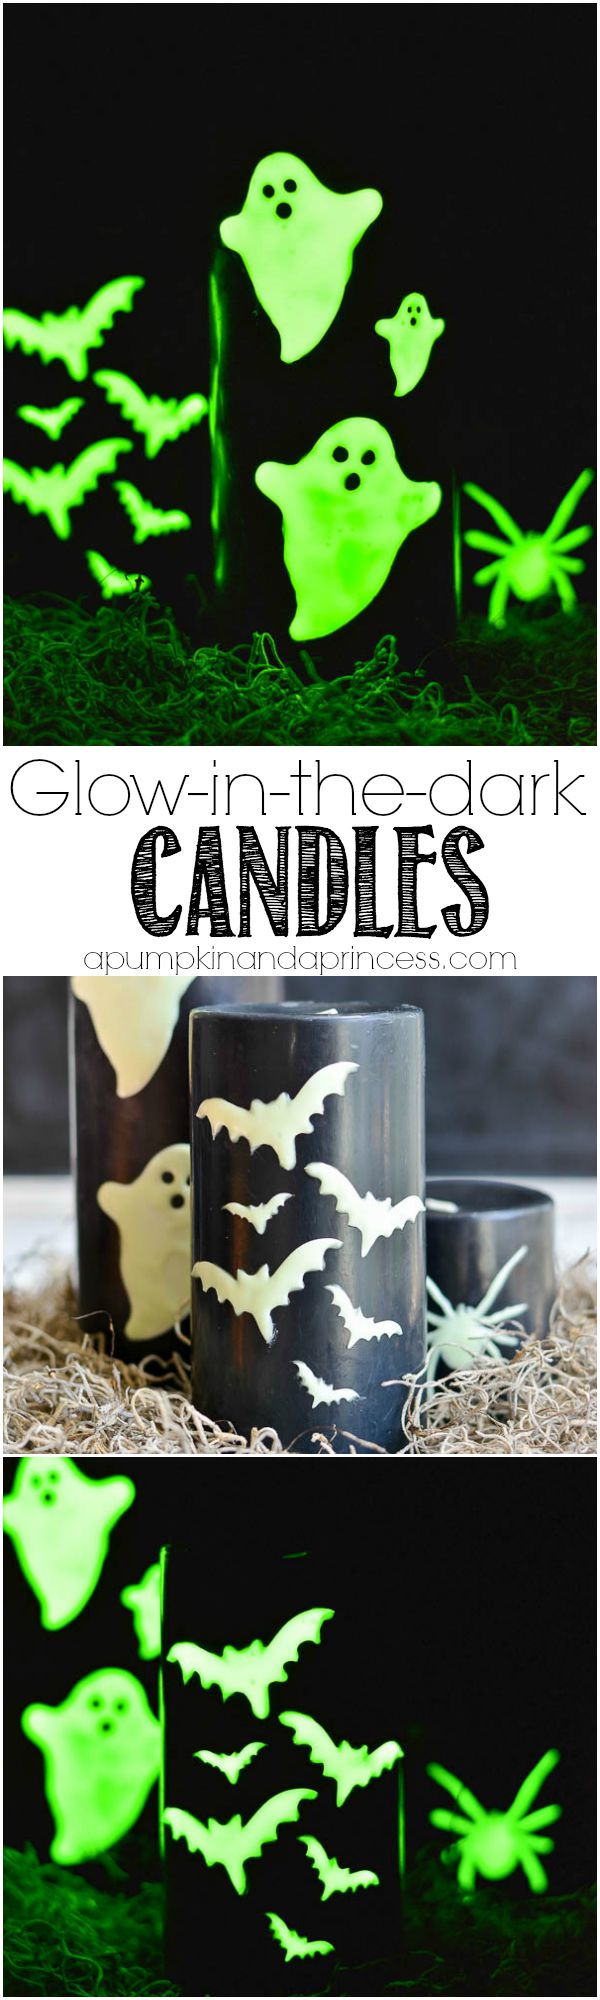 DIY-Glow-in-the-dark-Candles